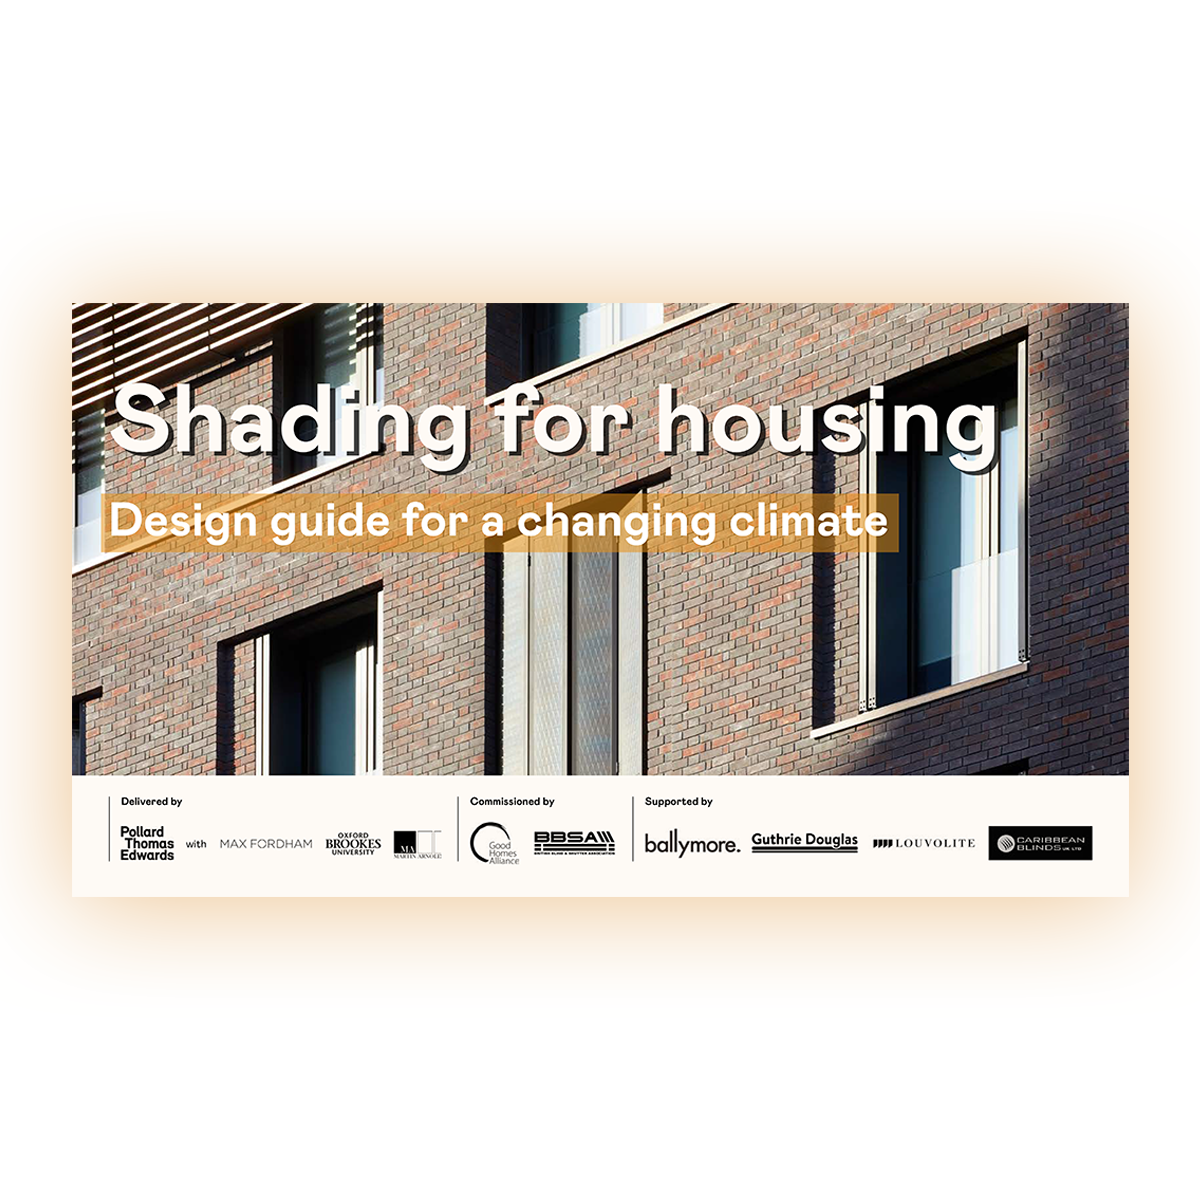 New design guide launched on shading for housing